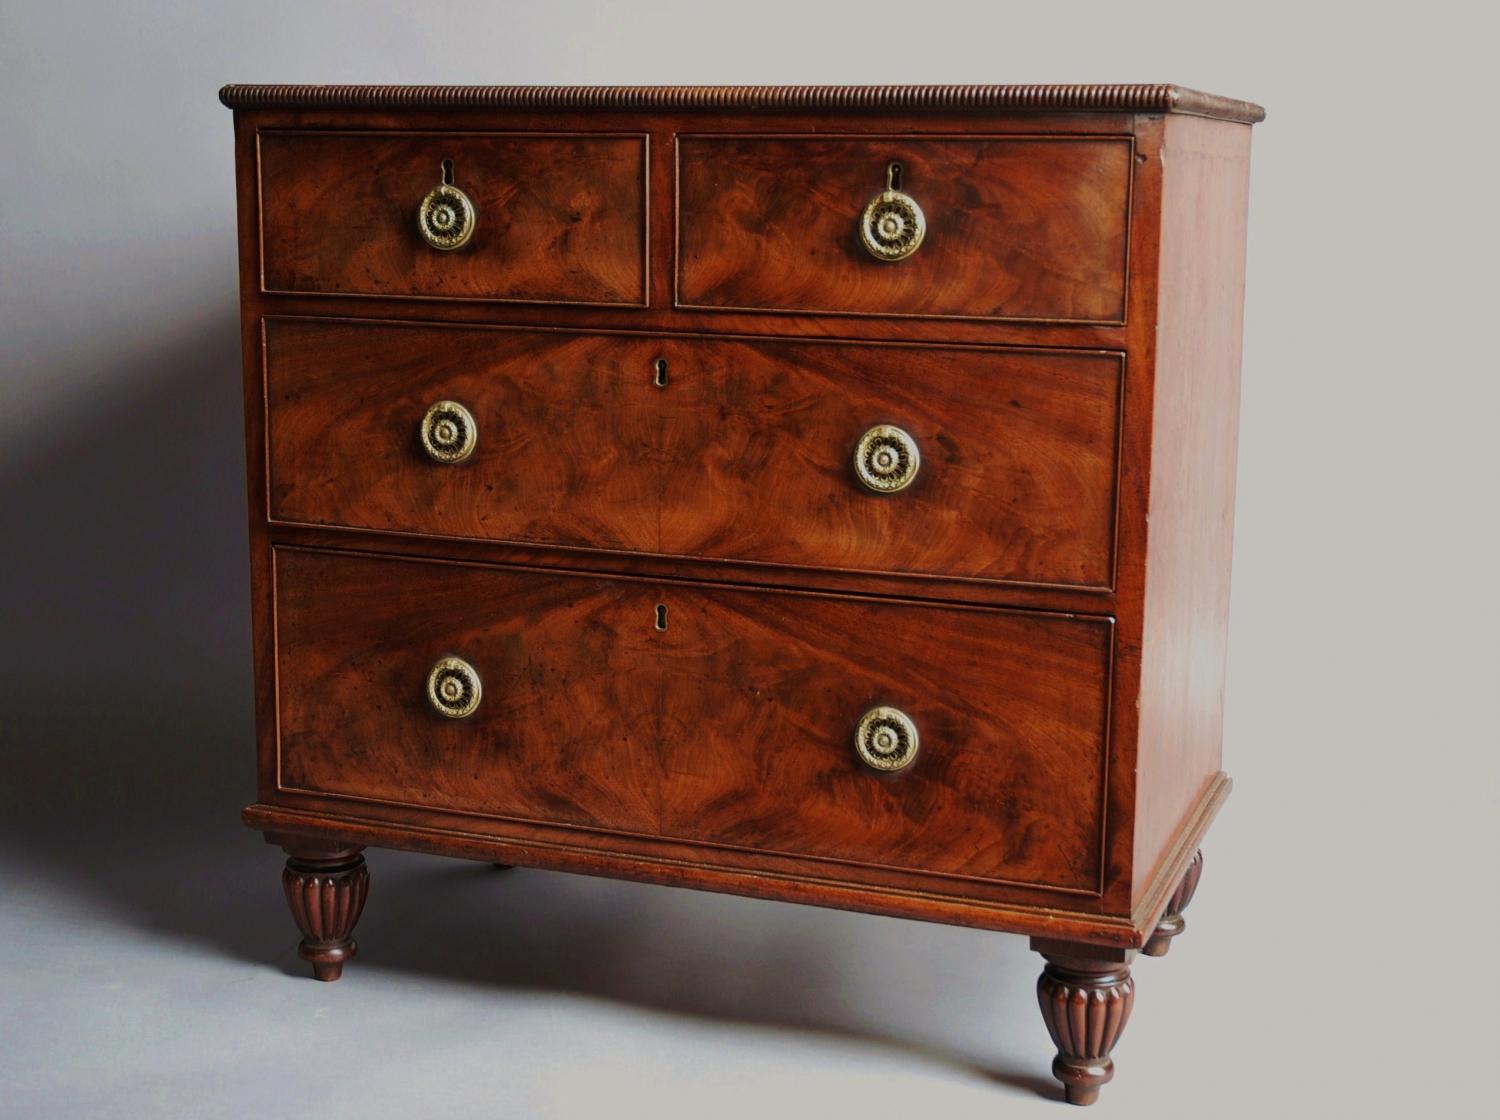 Fine quality small mahogany chest of drawers